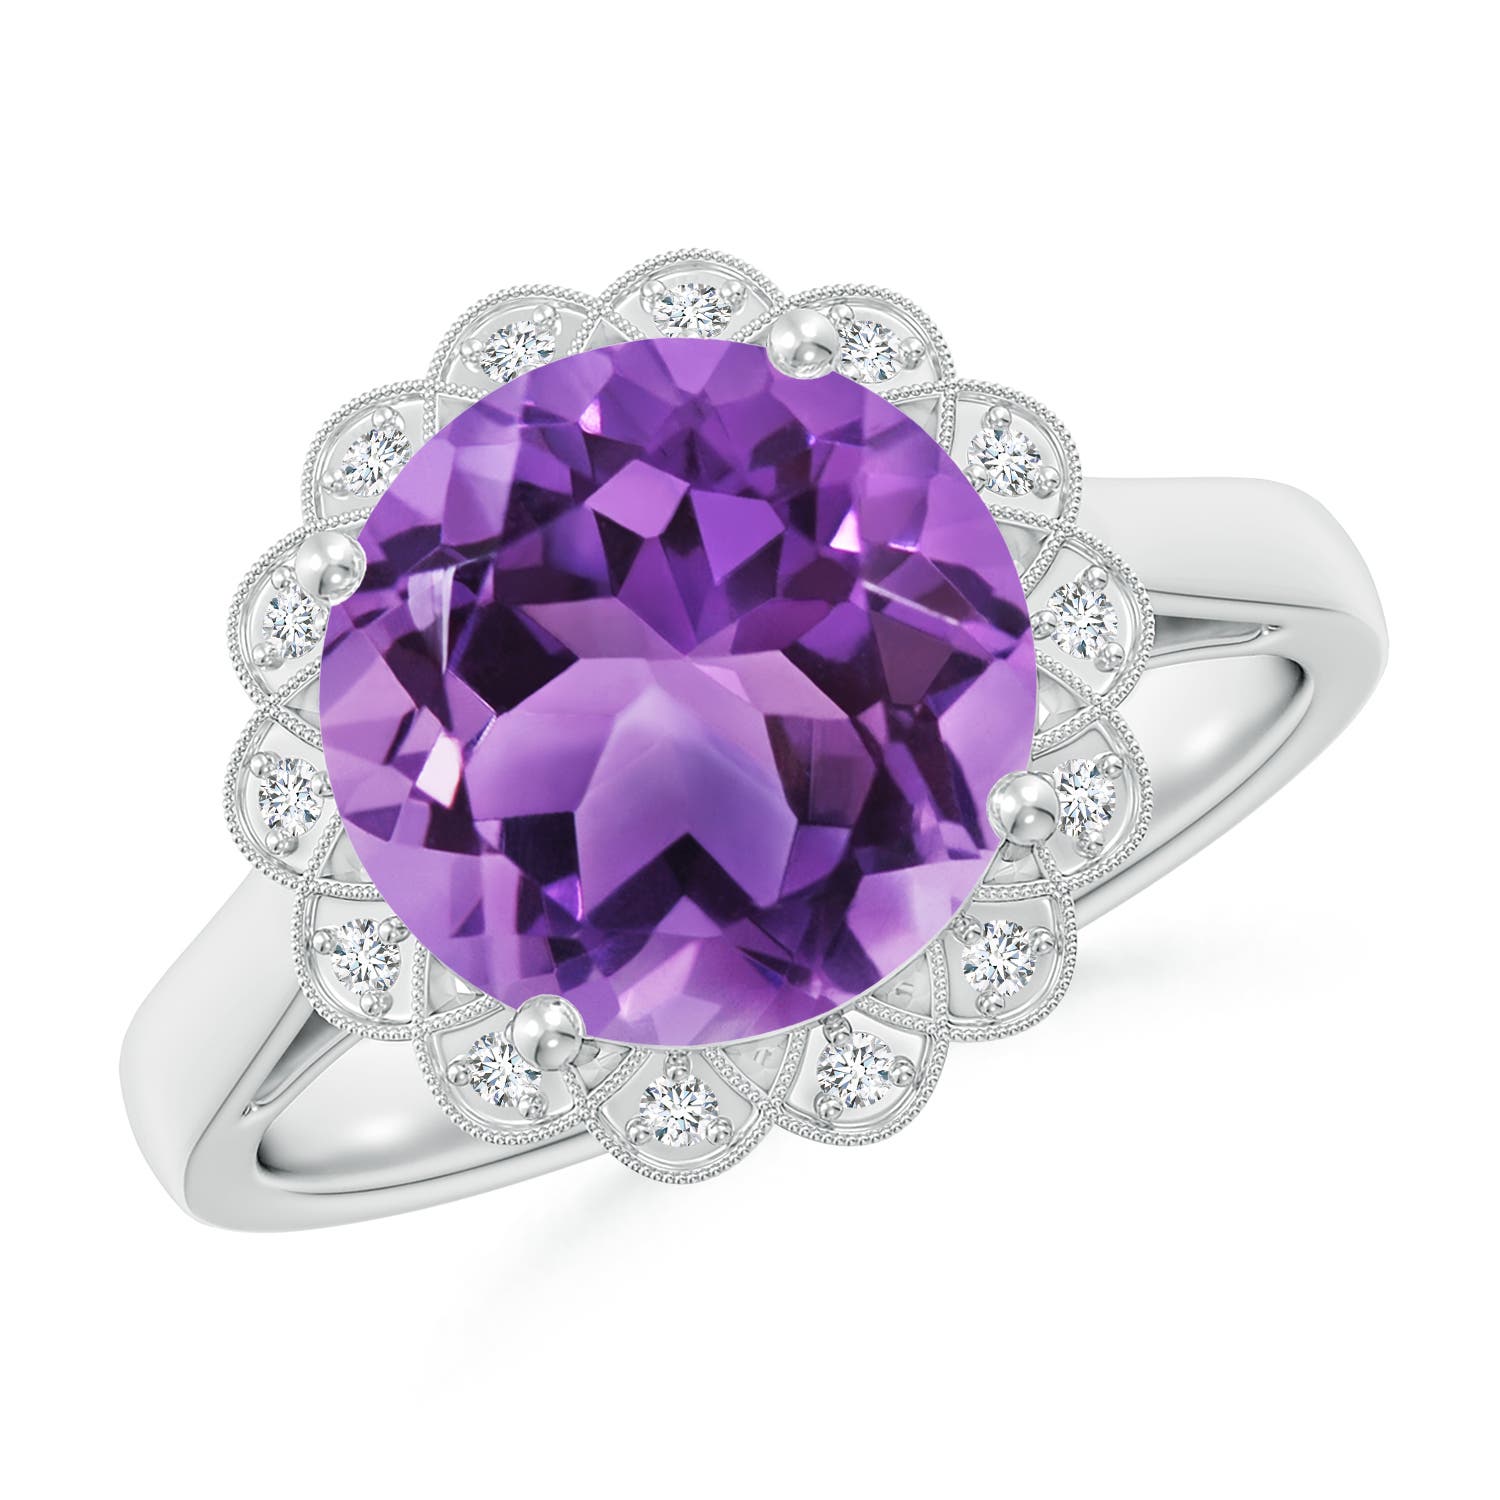 AA - Amethyst / 3.28 CT / 14 KT White Gold